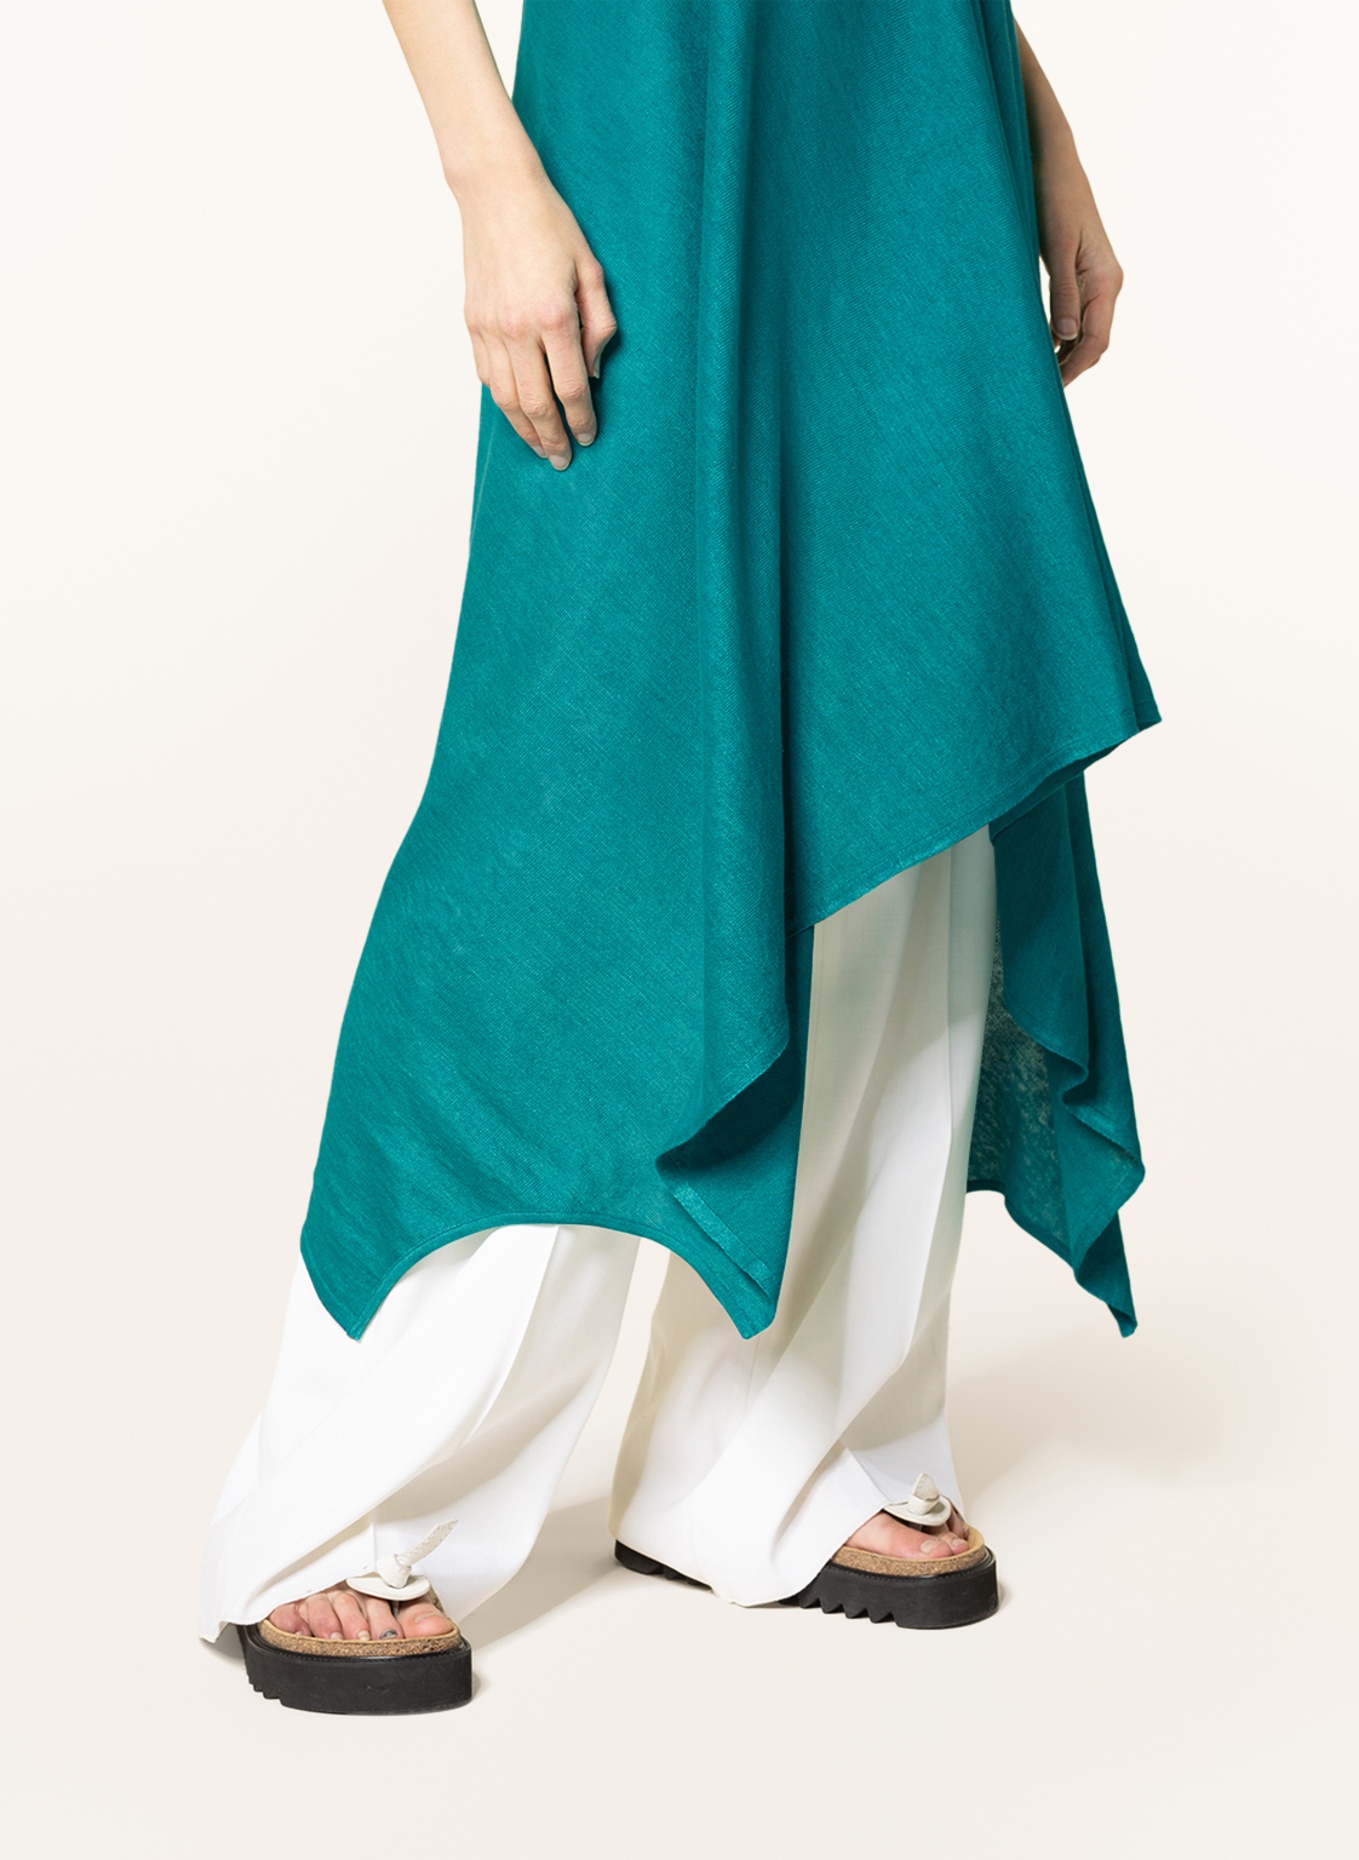 ALANUi Knit dress GET LOST made of linen, Color: TEAL (Image 5)